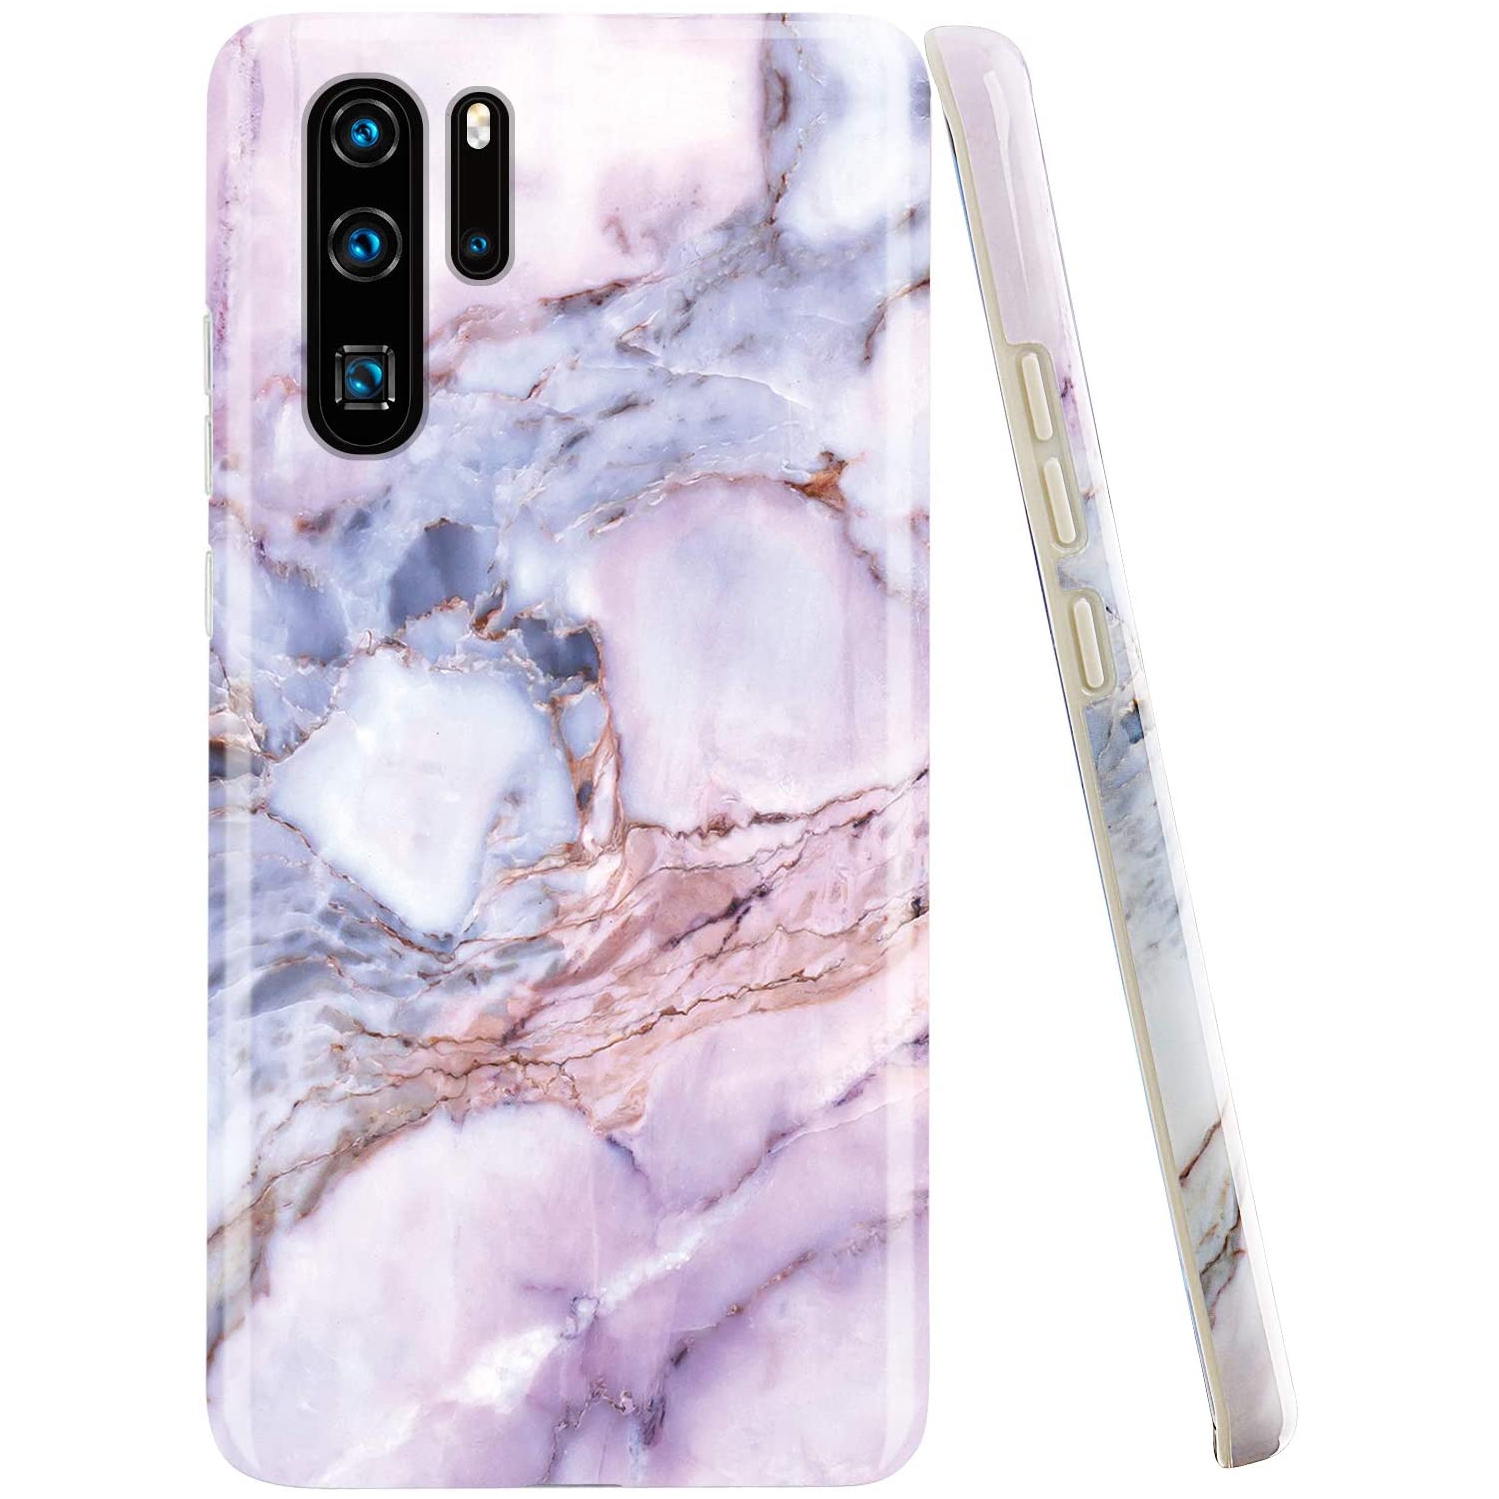 Compatible Huawei P30 Pro Case Purple Marble Design Clear BumCooper Glossy TPU Soft Rubber Silicone Cover Phone